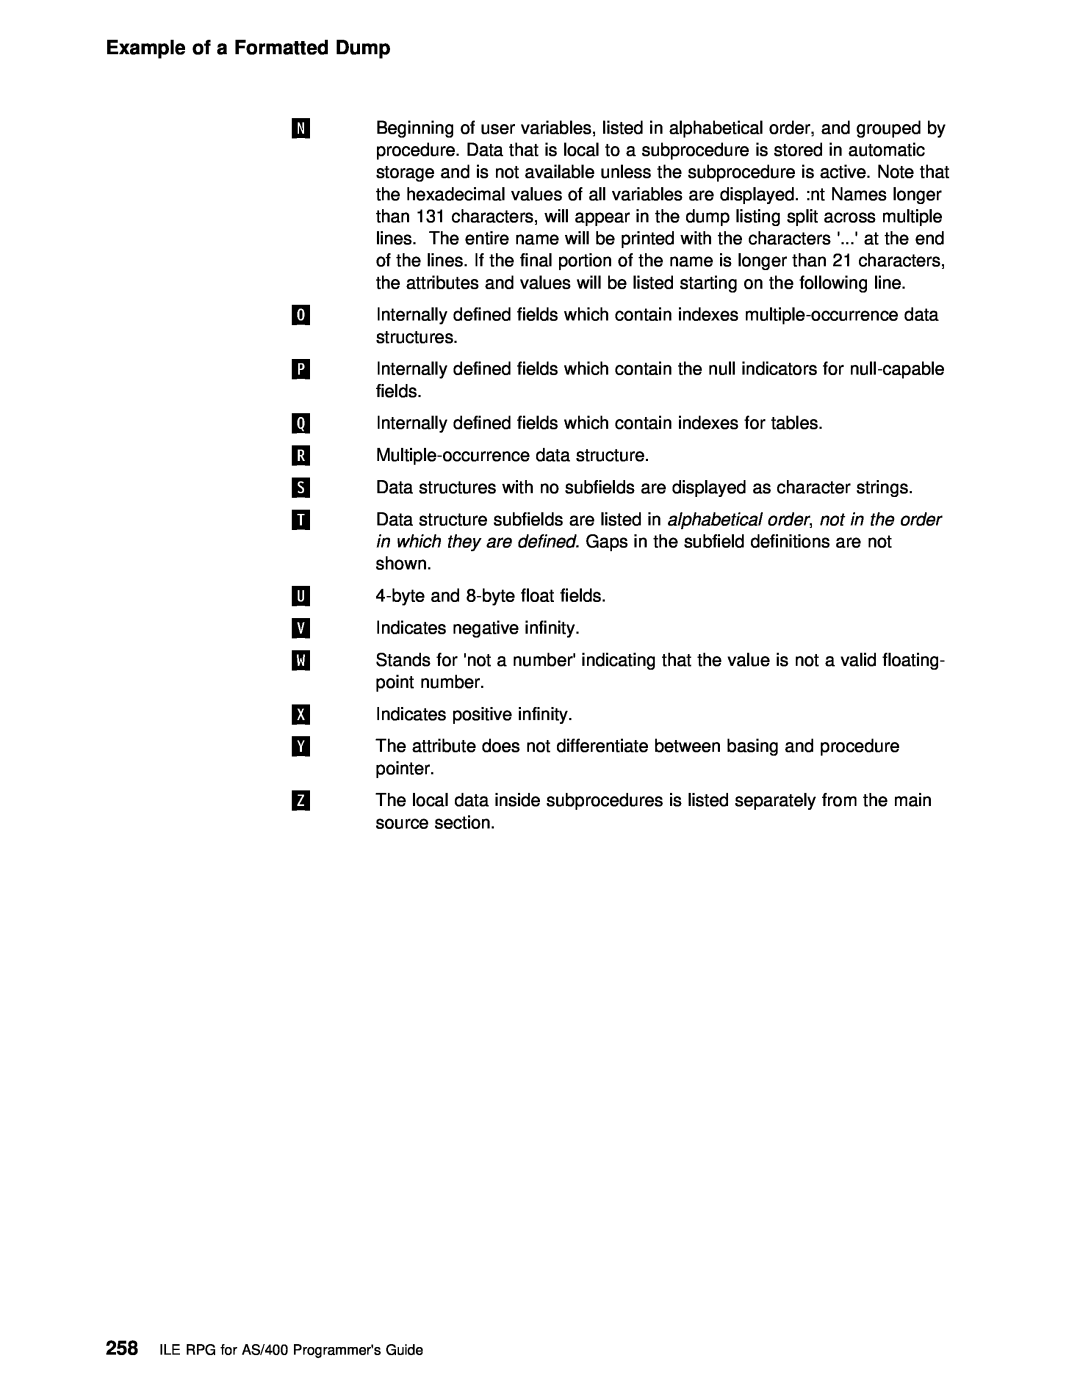 IBM AS/400 manual Example of a Formatted Dump 